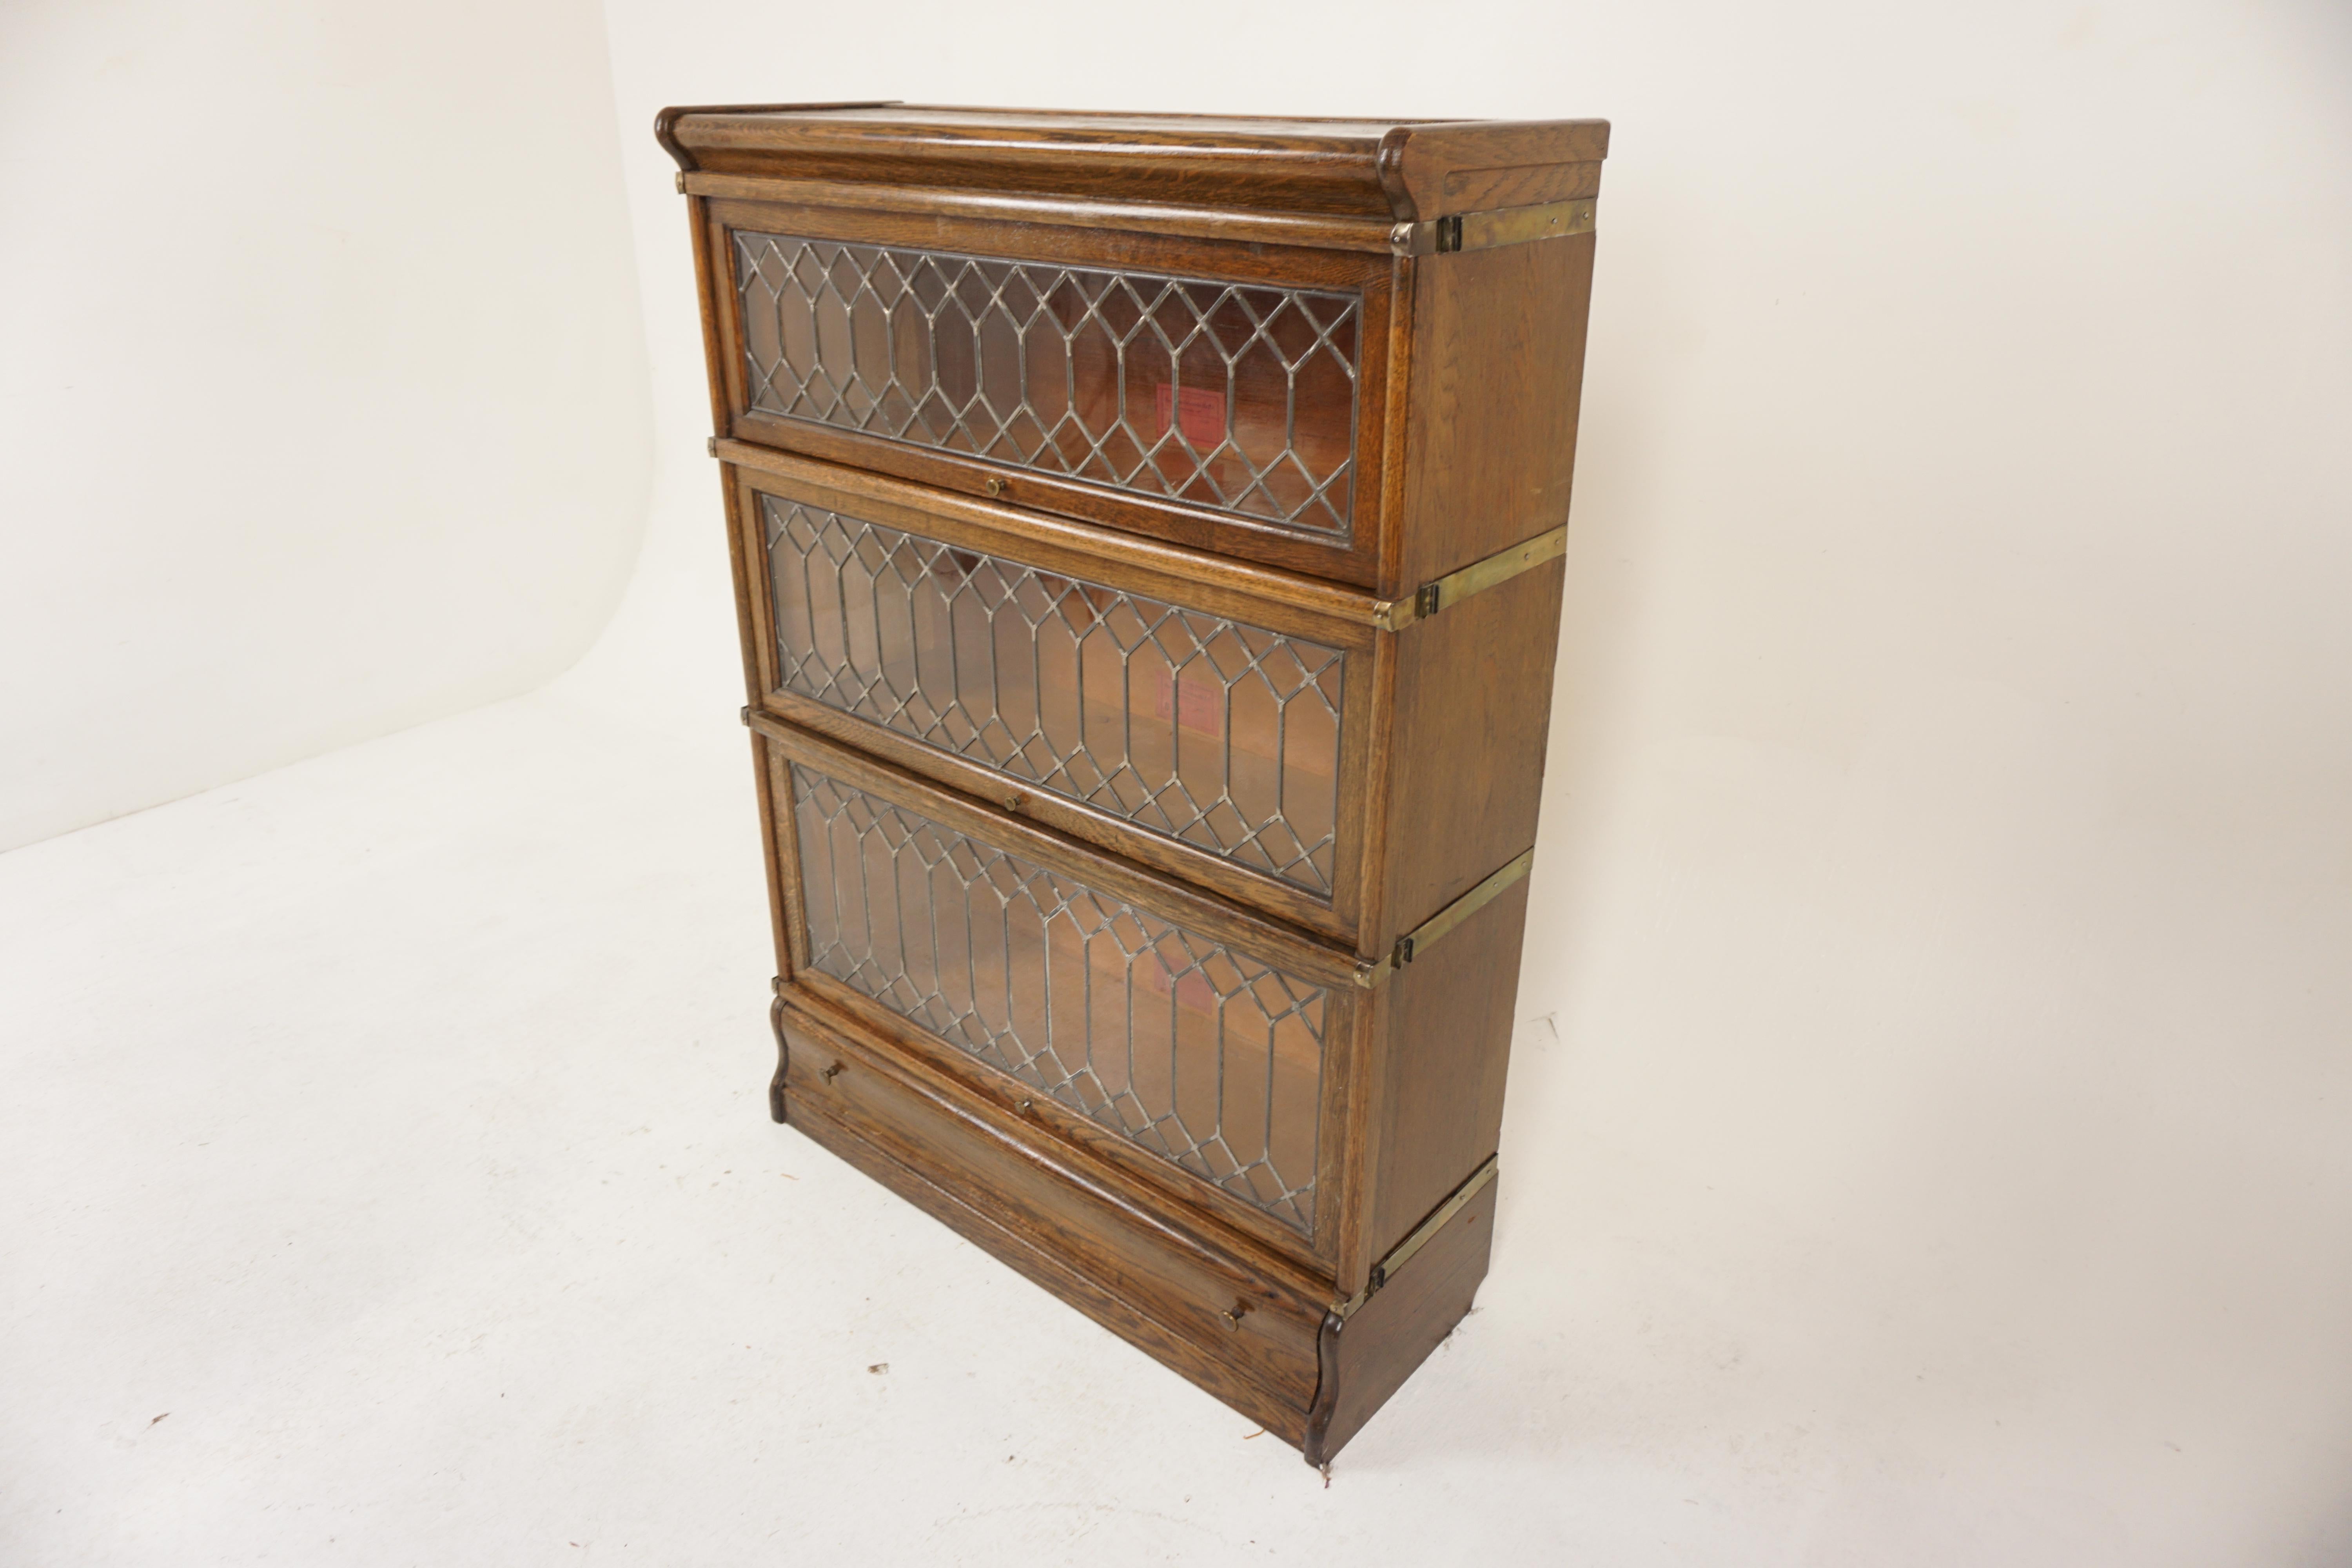 Quality Leaded Glass Oak Sectional Bookcase Globe Wernicke, Canada 1910, H1179

Solid Oak
Original finish
Oak top with low gallery on three sides
With three graduating doors with leaded glass and brass lifting knobs
The doors open and retract back